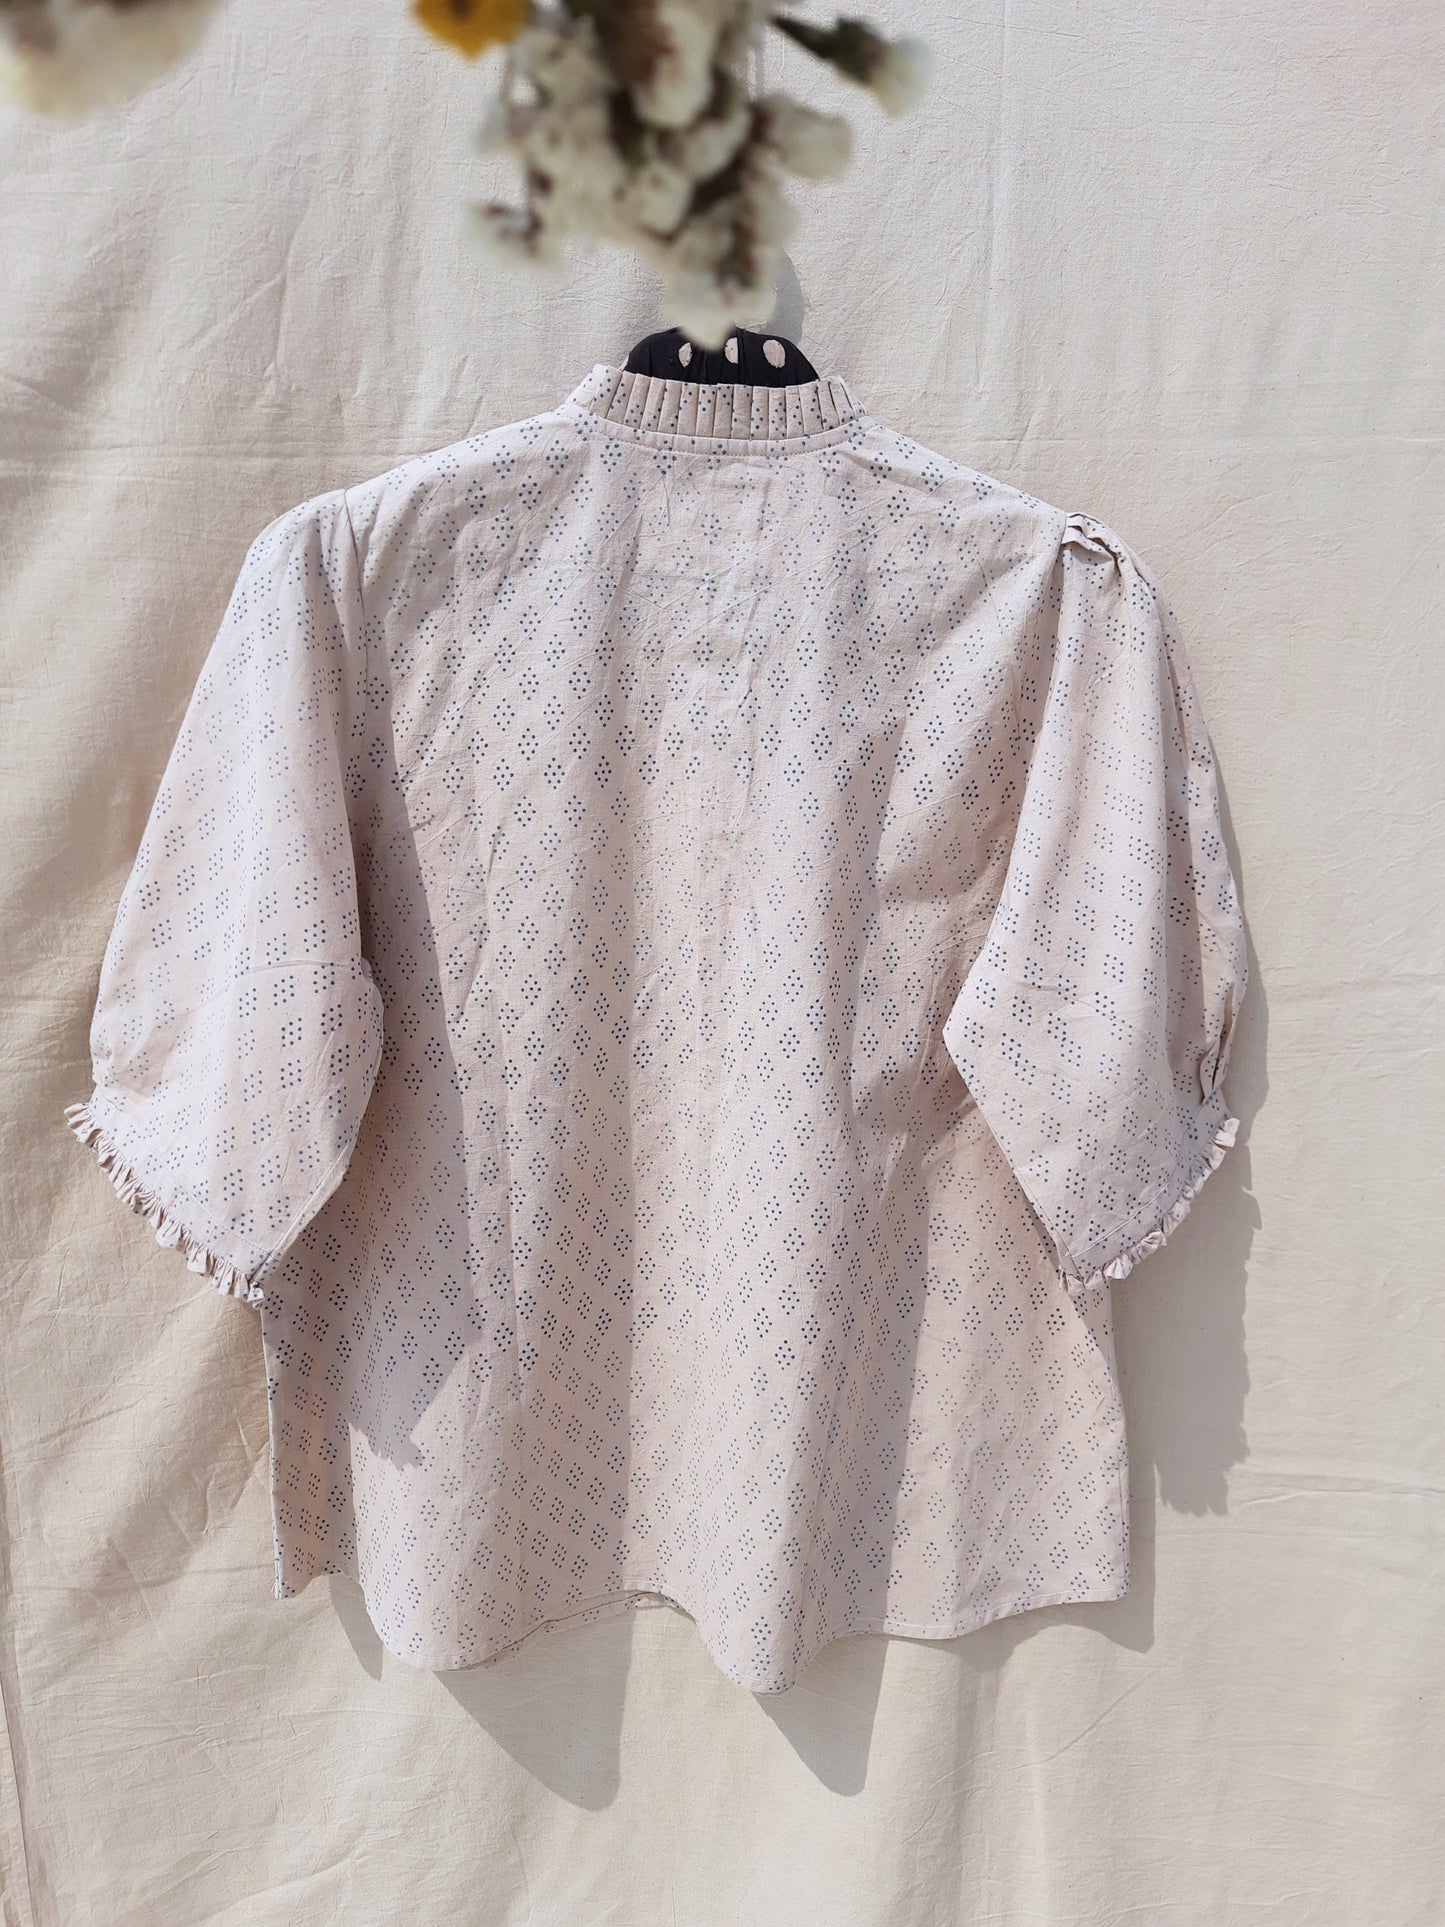 Beige polka dots shirt for her, Handcrafted women's shirt, Cotton shirt for her, Slow fashion